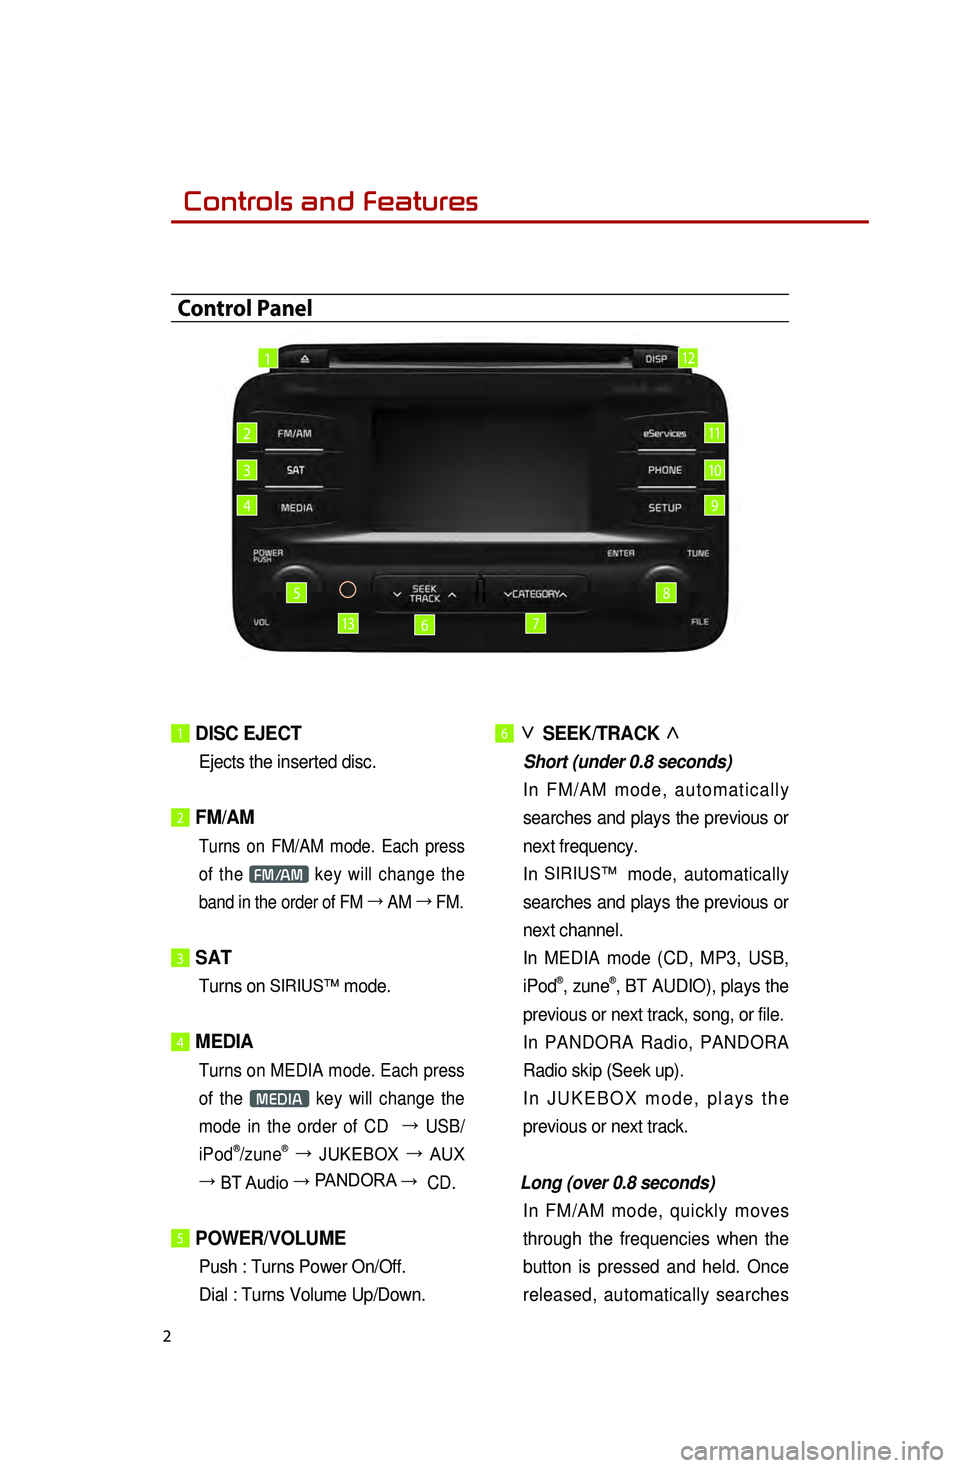 KIA OPTIMA HYBRID 2015  Quick Reference Guide 2
1 DISC  EJECT
Ejects the inserted disc.
 
2 FM/AM
 Turns on FM/AM mode. Each press 
of the 
FM/AM key will change the 
band in the order of FM  →
 AM  →
 FM.
3 SAT
Turns on SIRIUS™  mode. 
4 M